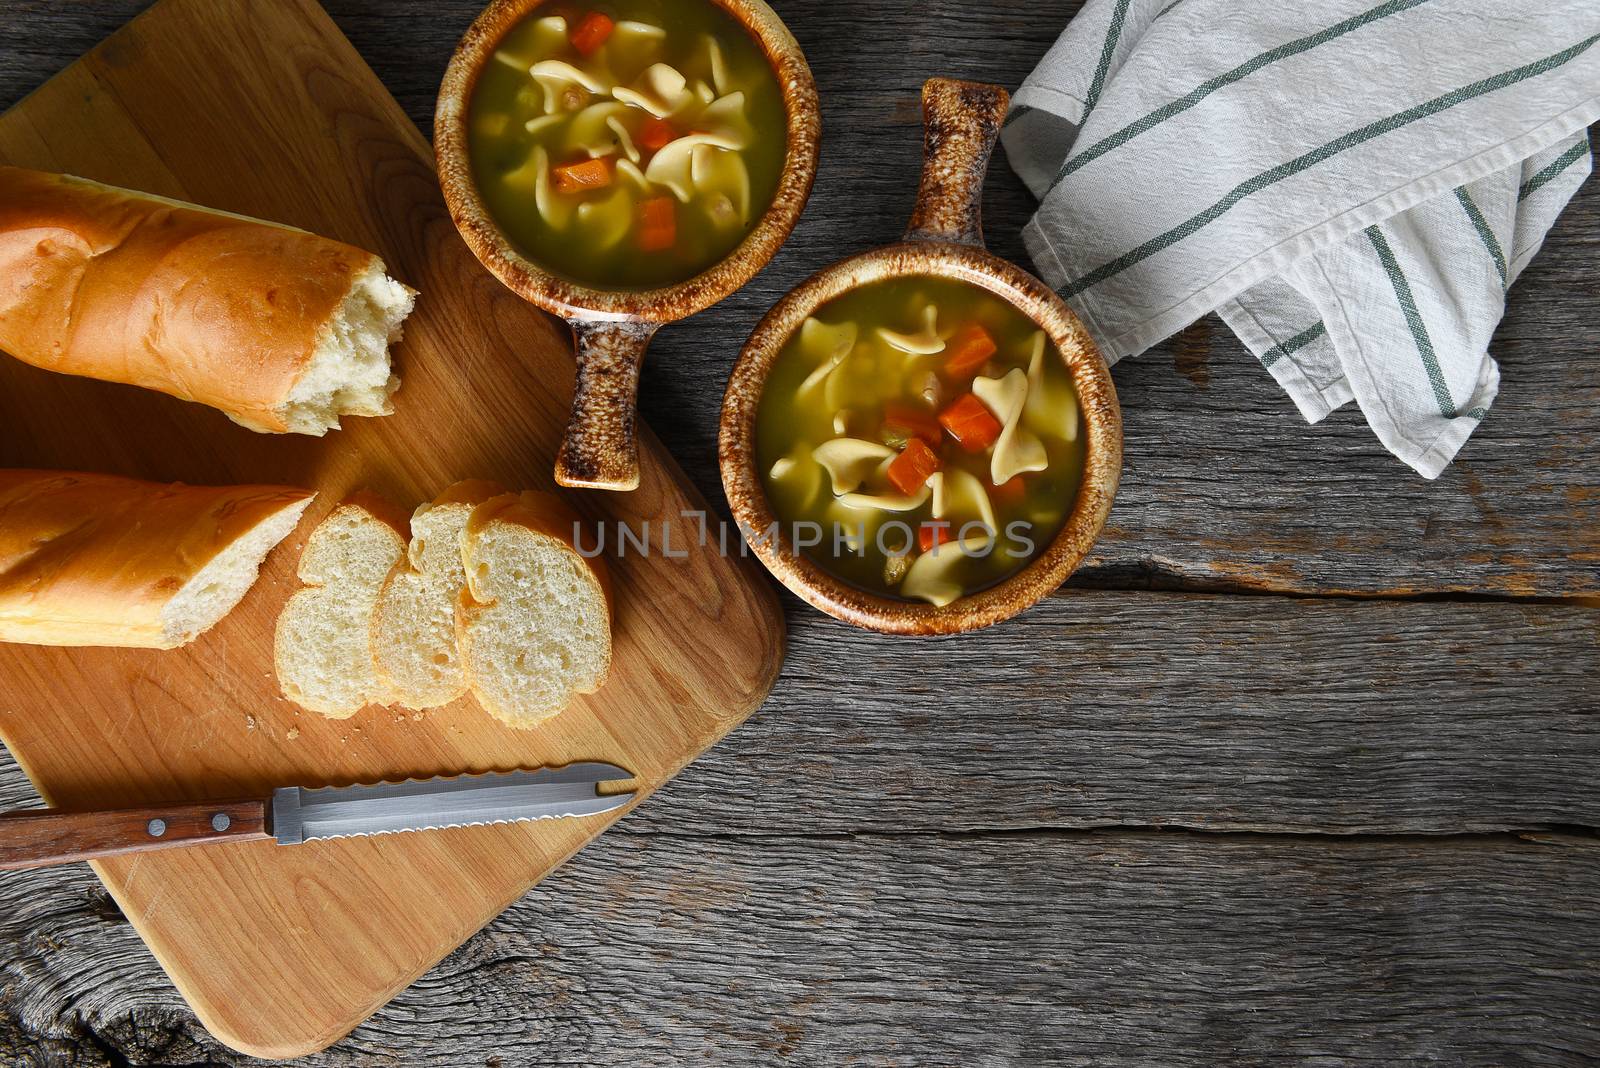 Top view of two bowls of homemade Chicken Noodle Soup with fresh baked loaf of bread. Horizontal with copy space.